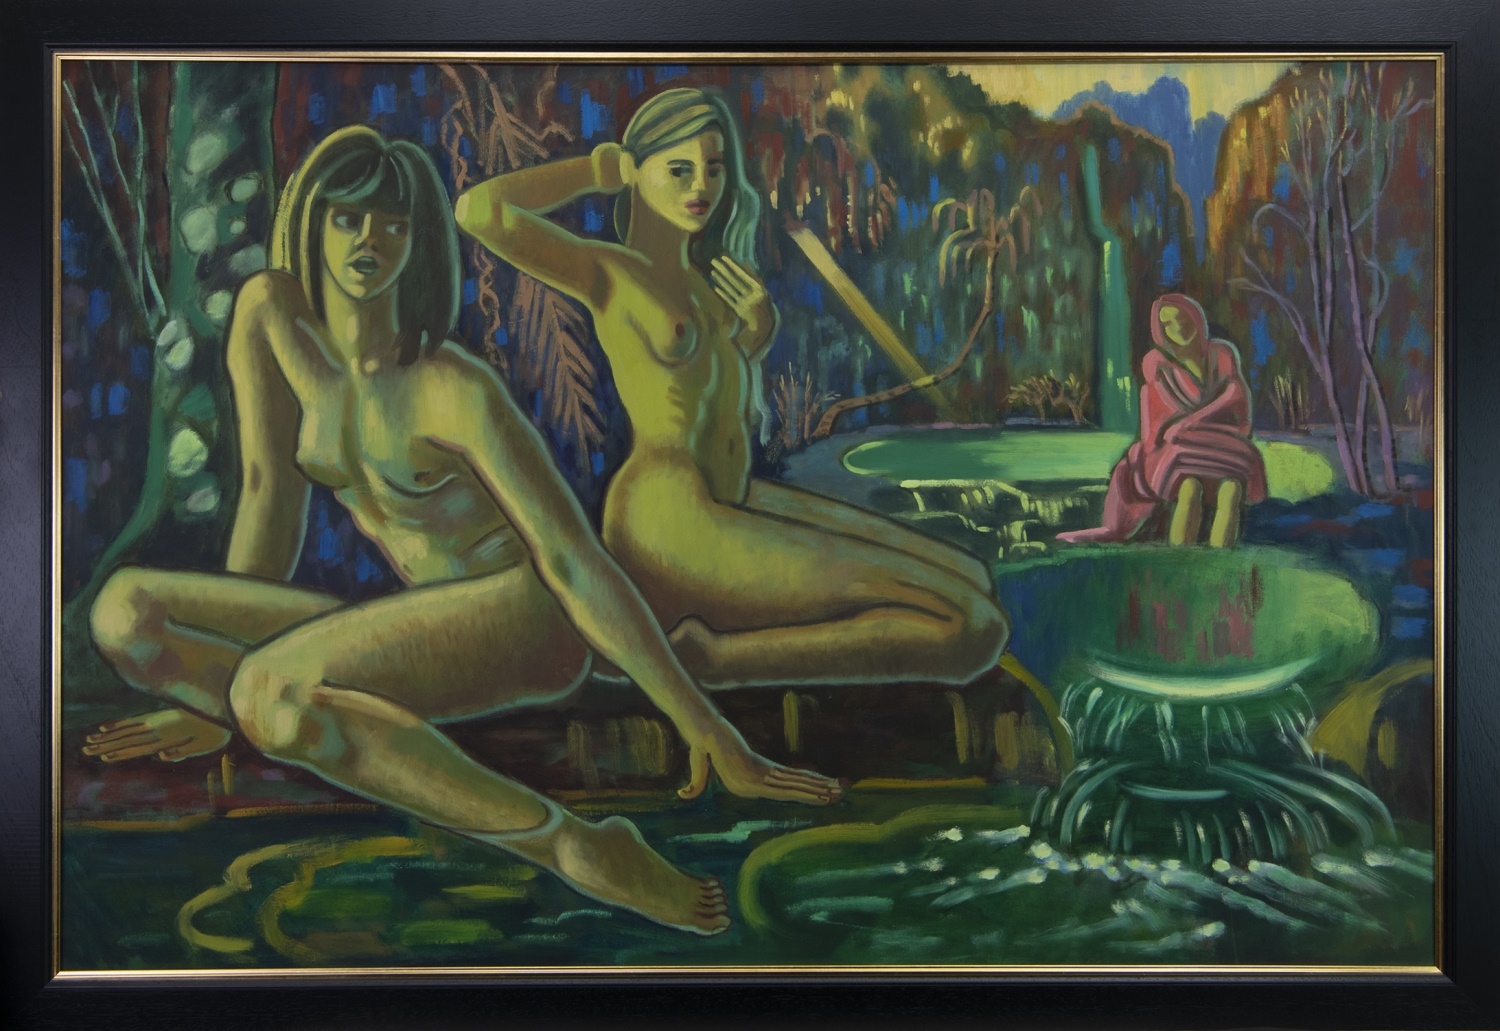 THE DAUGHTERS OF BABYLON, AN OIL BY RICHARD TURNER